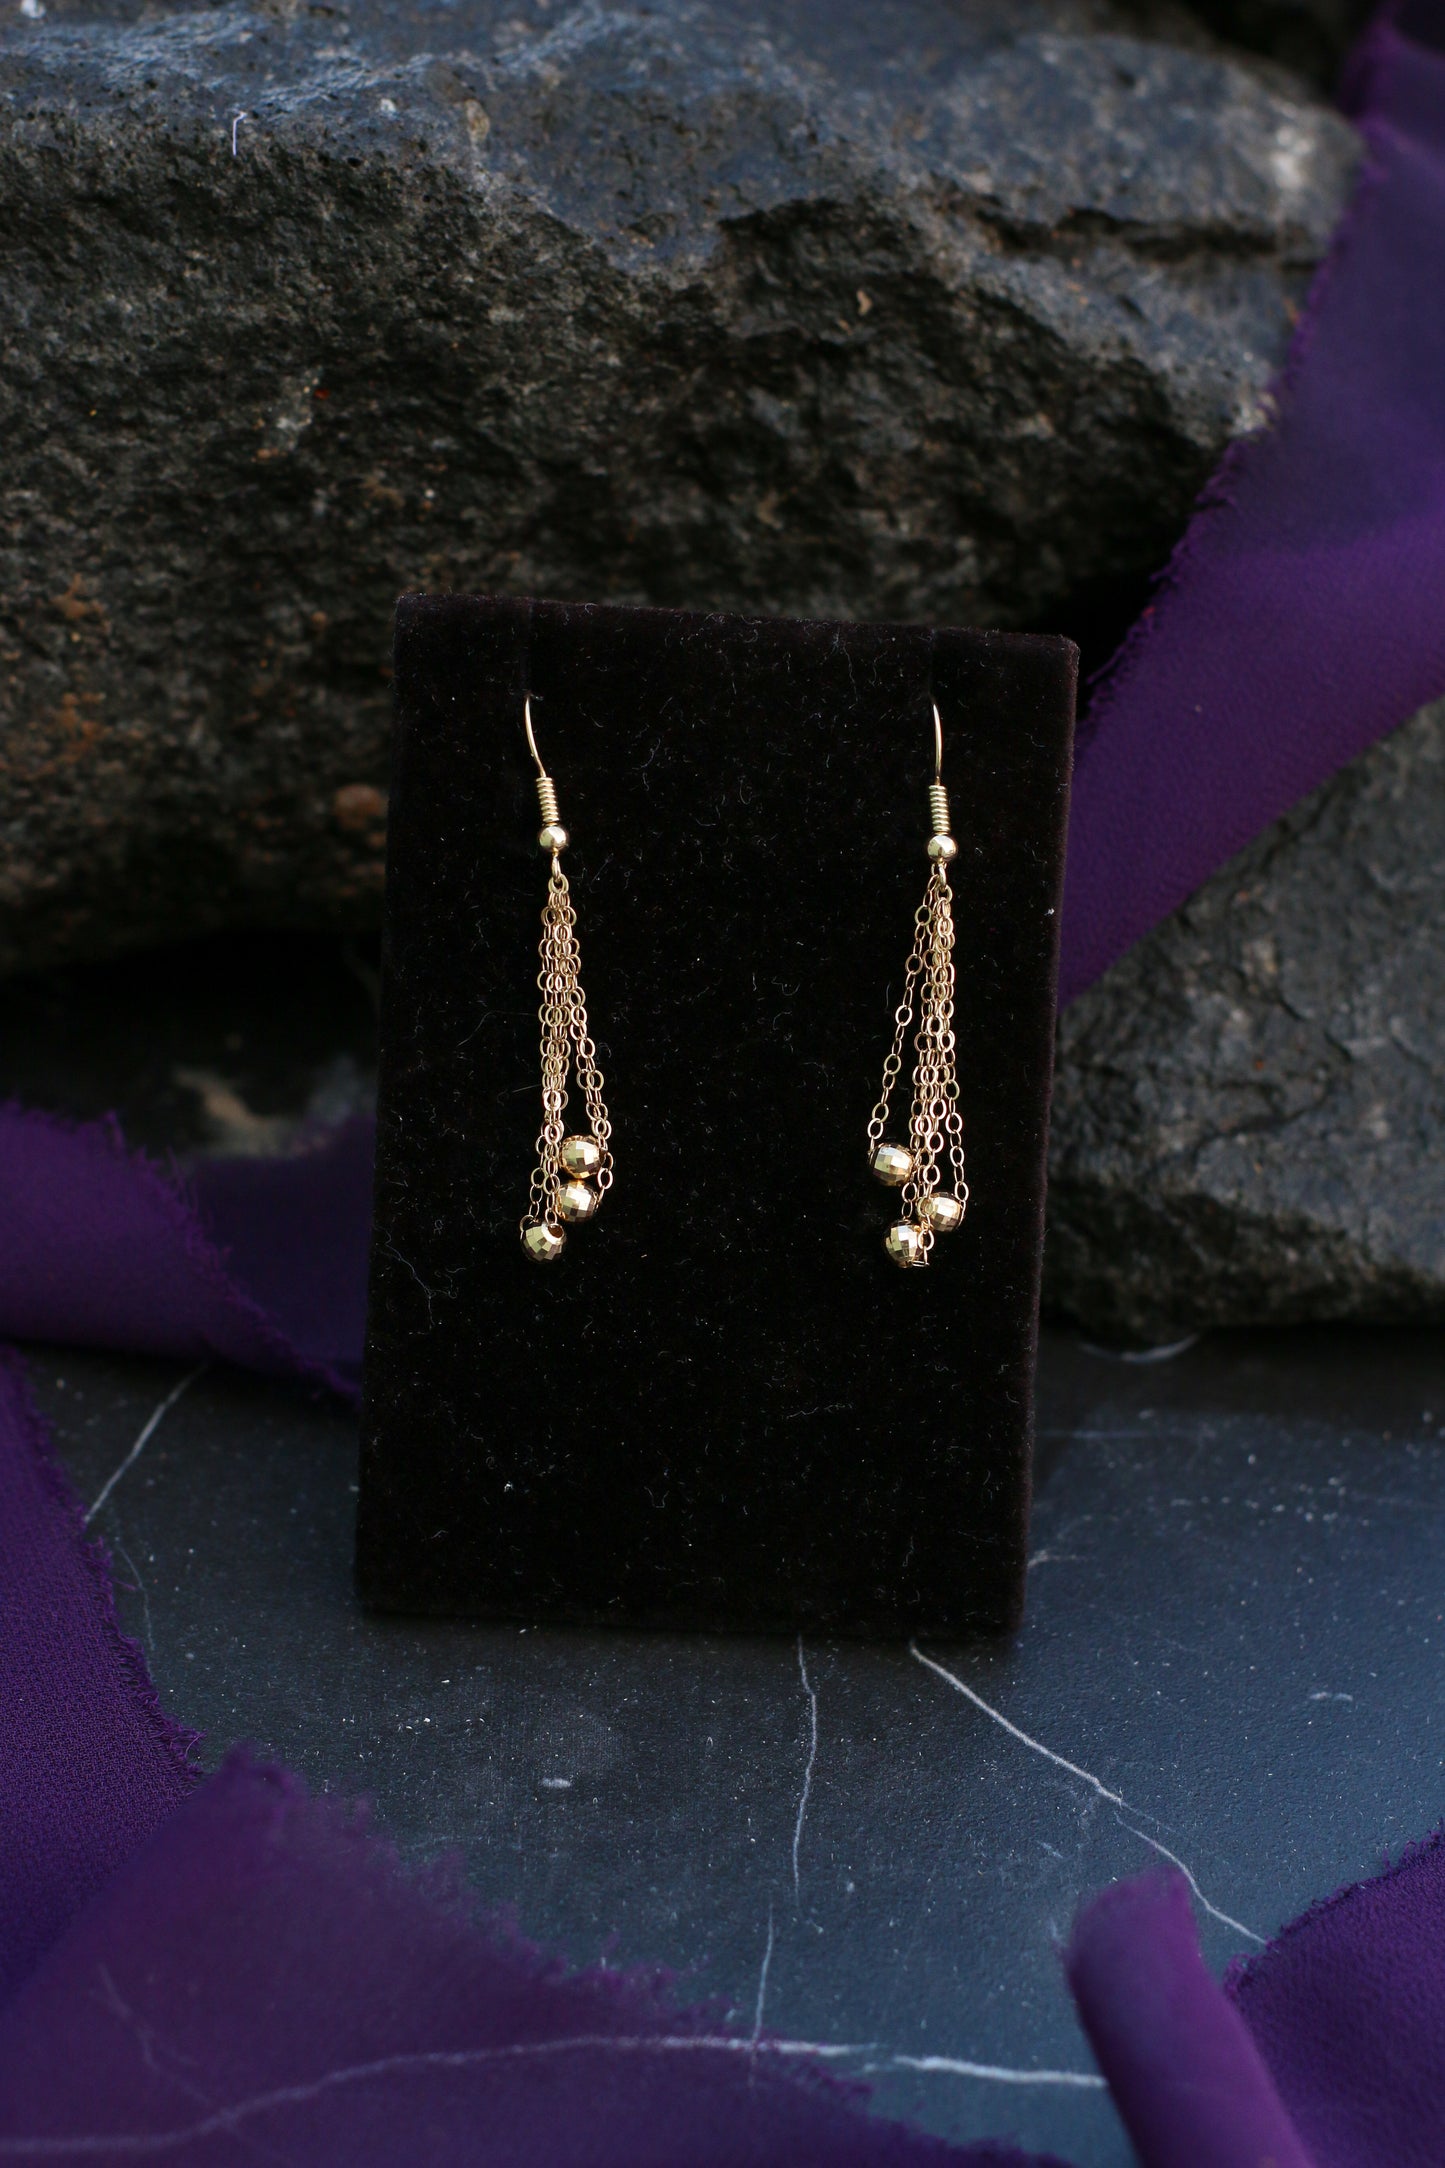 14K Gold Earrings & Necklaces, 40% off Closeout Sale, Checkout code AHSG